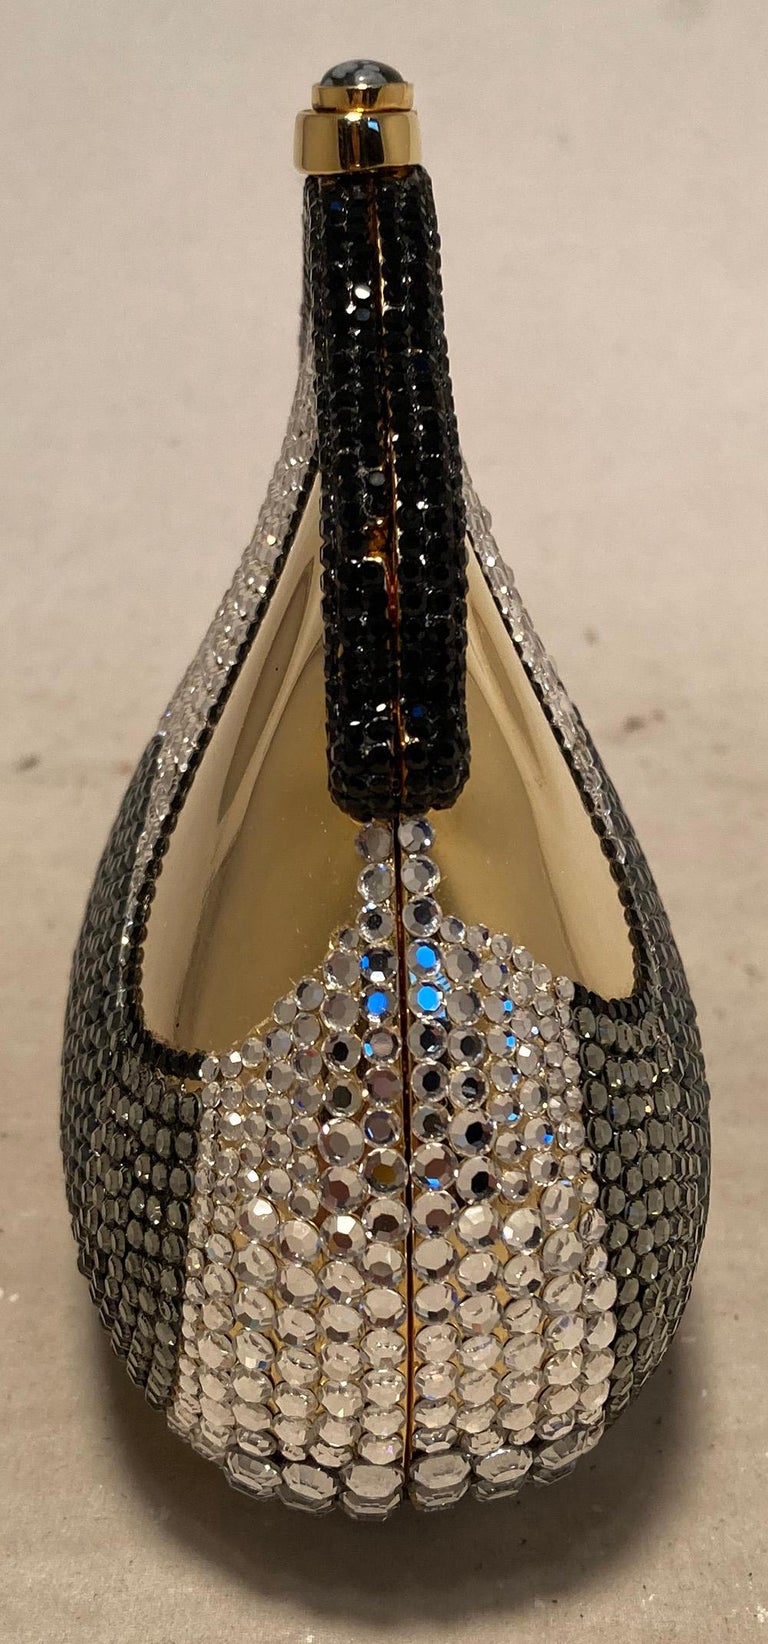 Rare Vintage Judith Leiber Crystal Chantelaine Minaudiere in excellent condition. Gold coin purse shape body with black crystals along the top edge and silver, grey and black along the front, back and bottom. Top button closure opens to a gold